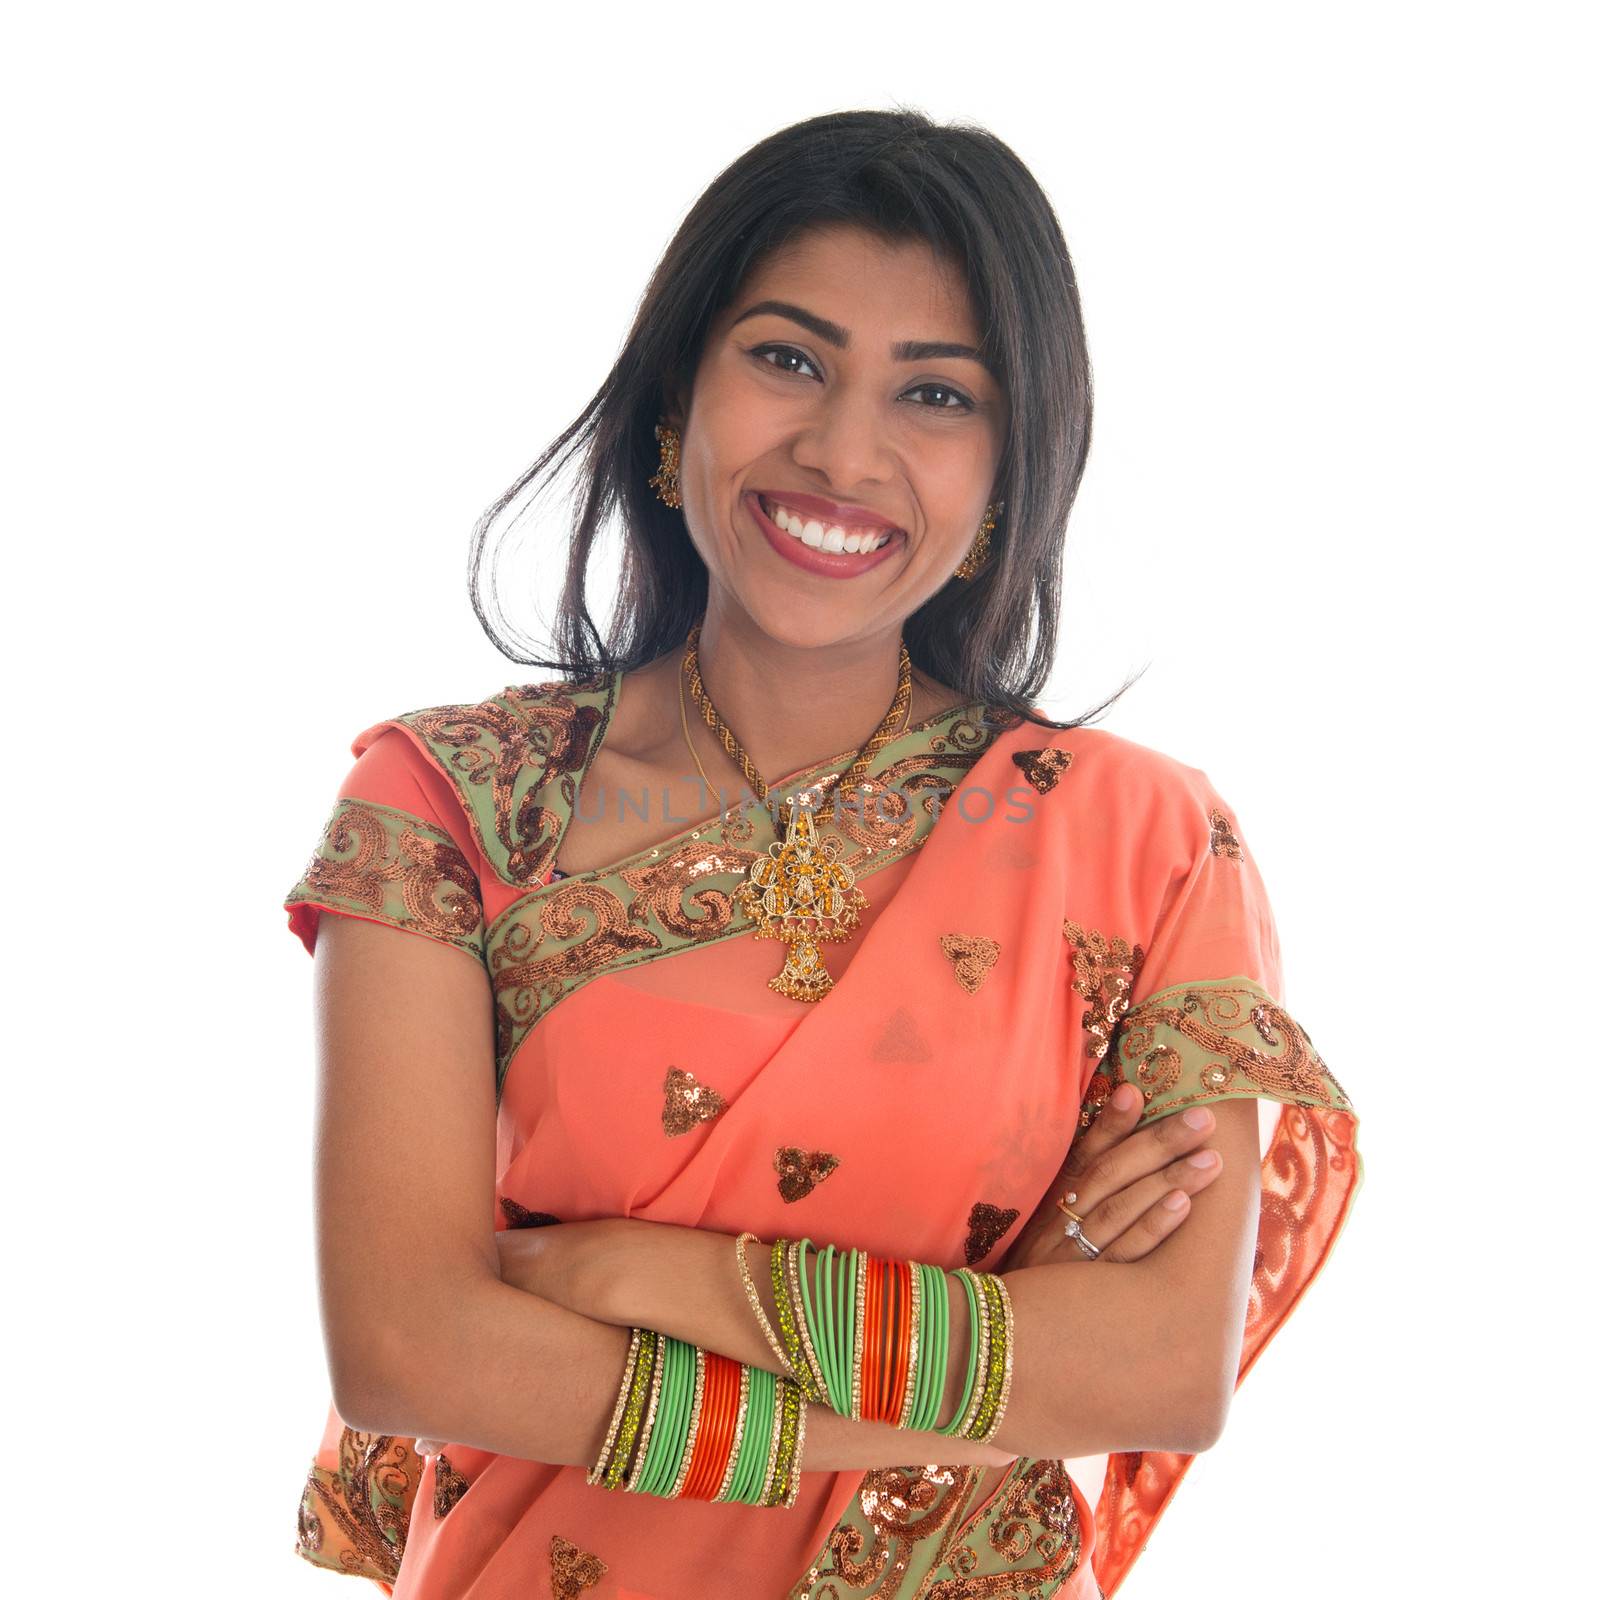 Portrait of beautiful traditional Indian woman in sari dress smiling, isolated over white background. 